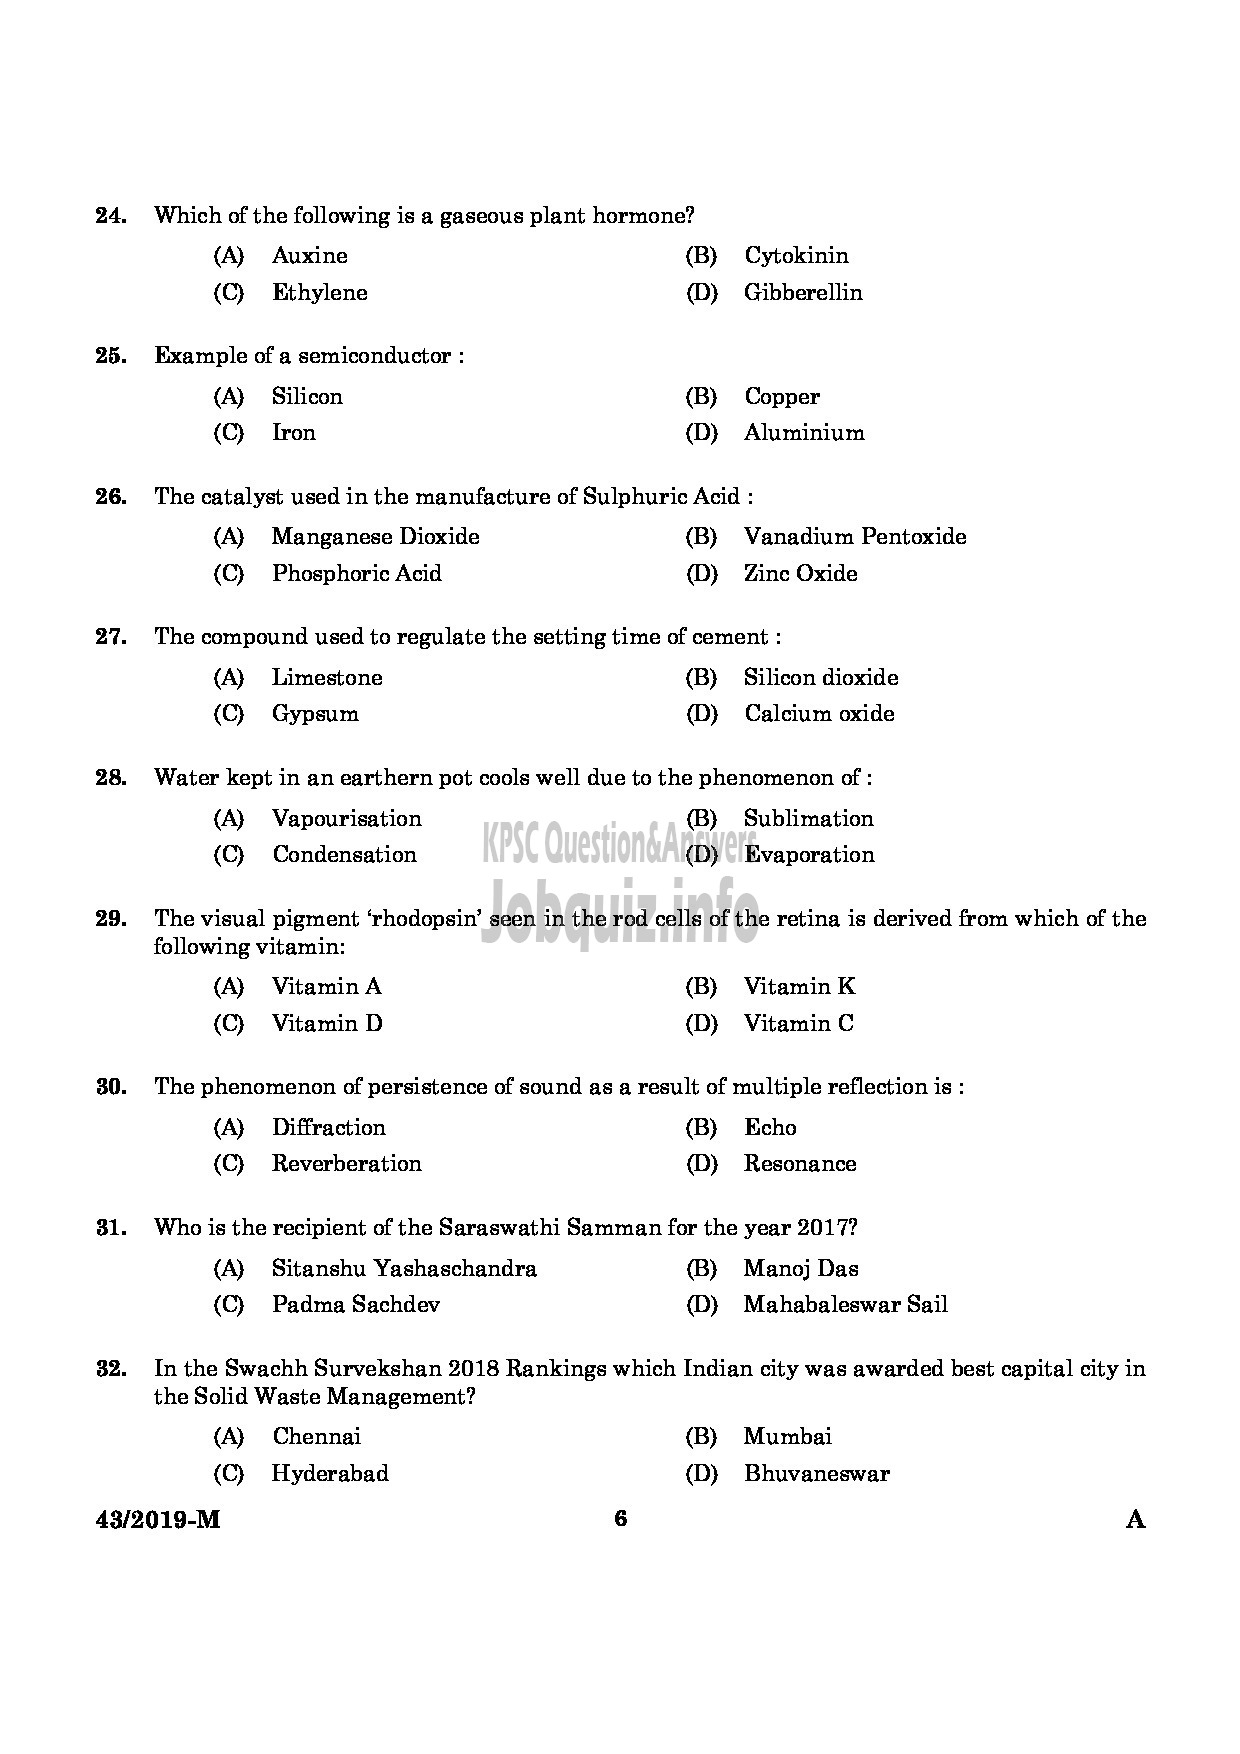 Kerala PSC Question Paper - Deputy Collector (SR For SC/ST) Land Revenue Department English / Malayalam -4